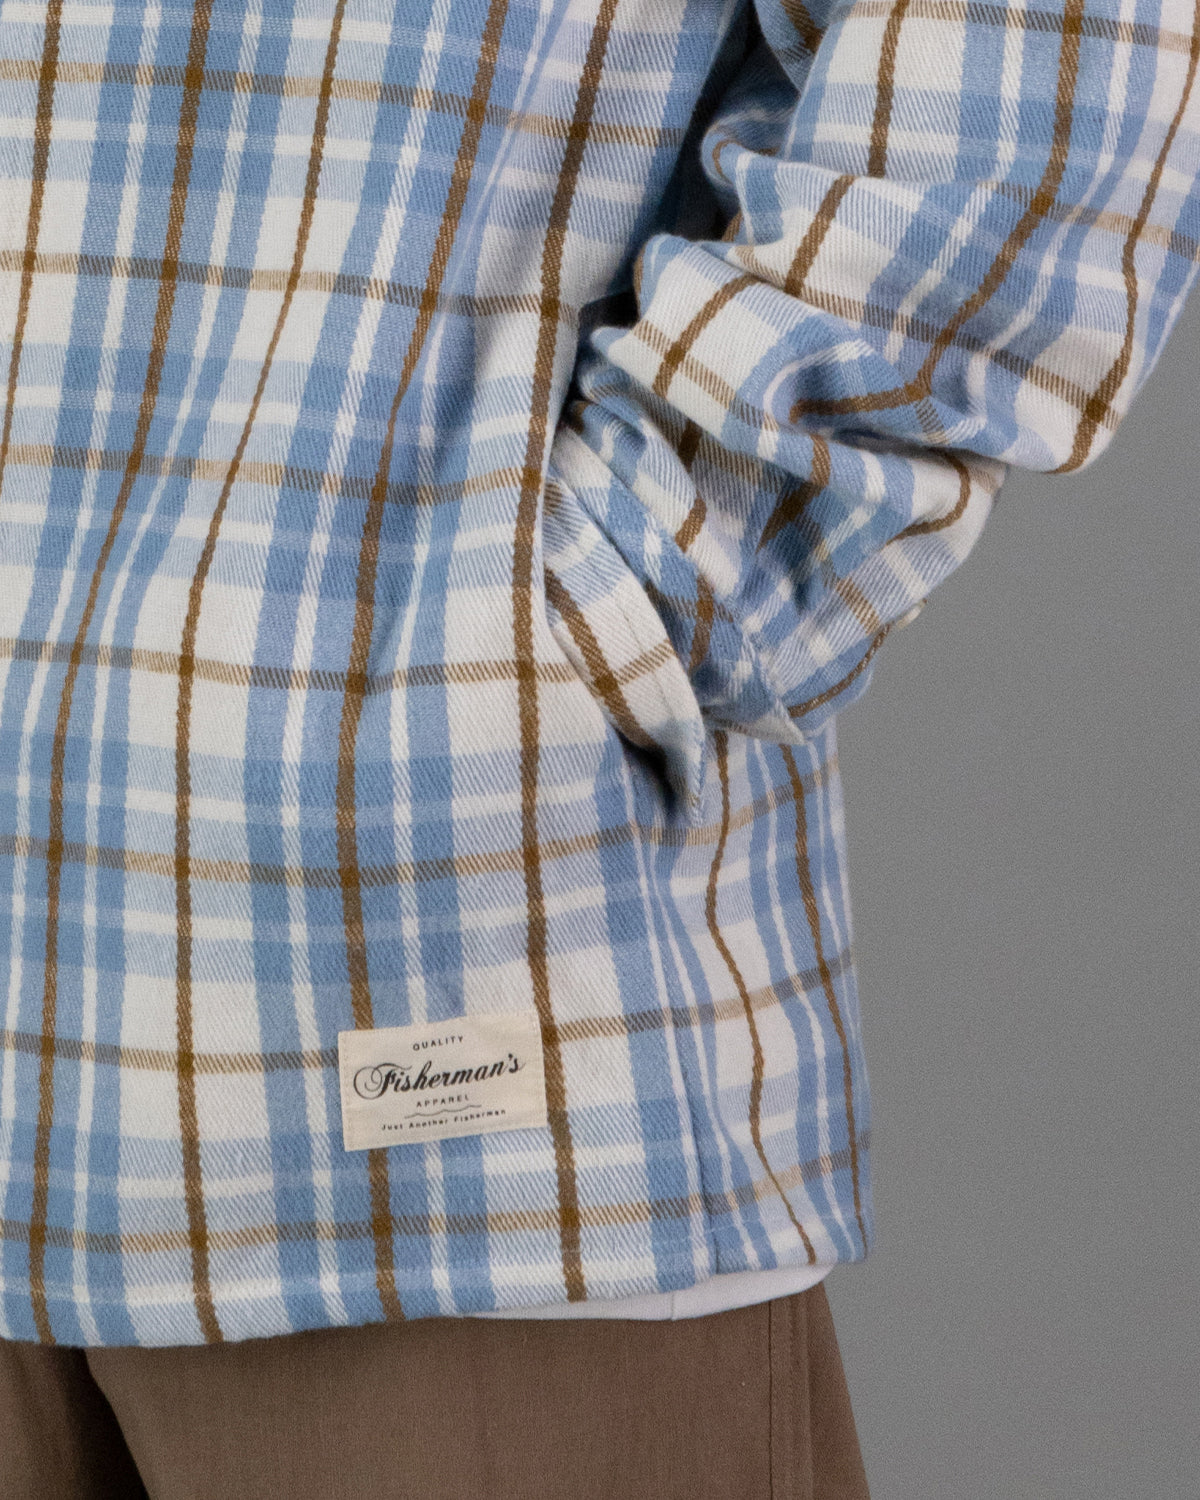 Just Another Fisherman Over and Out Shirt - Blue/Ivory Check